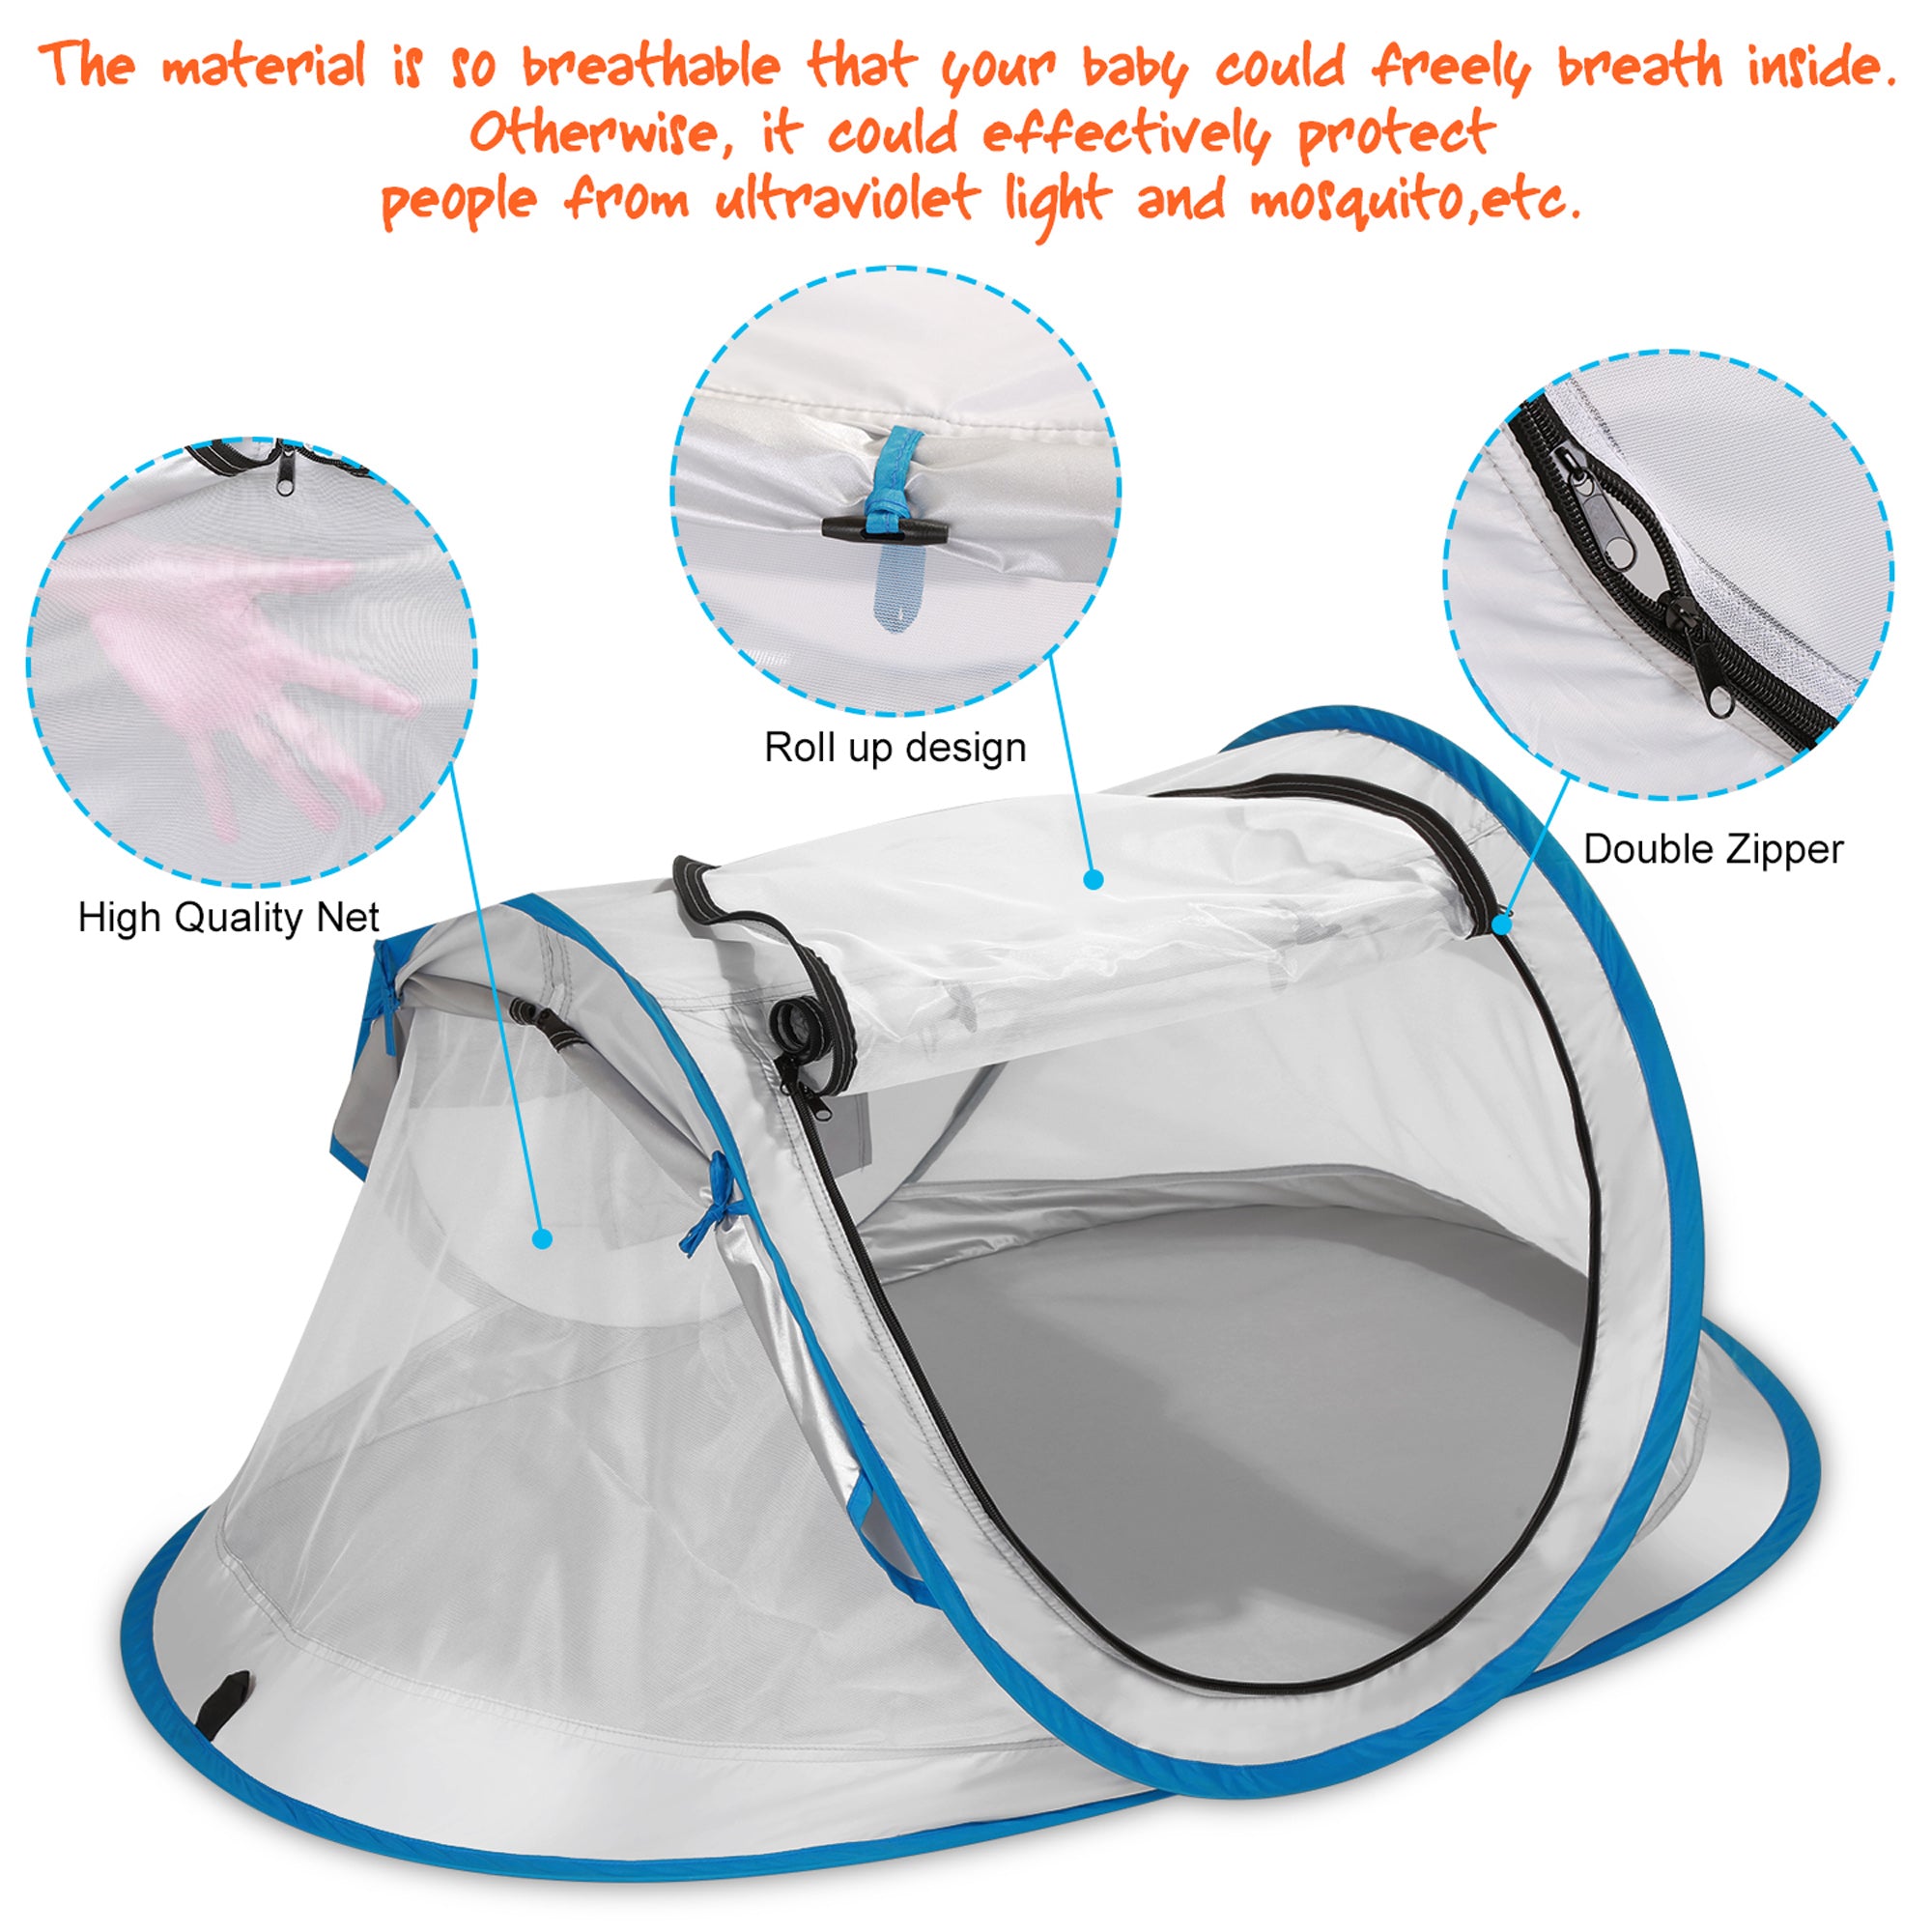 FINATE Baby Beach Tent UPF 50+UV Protection， Waterproof， Breathable and Portable， Pop Up Travel Tent Baby Mosquito Net for Beach， Garden， Camping， Hiking